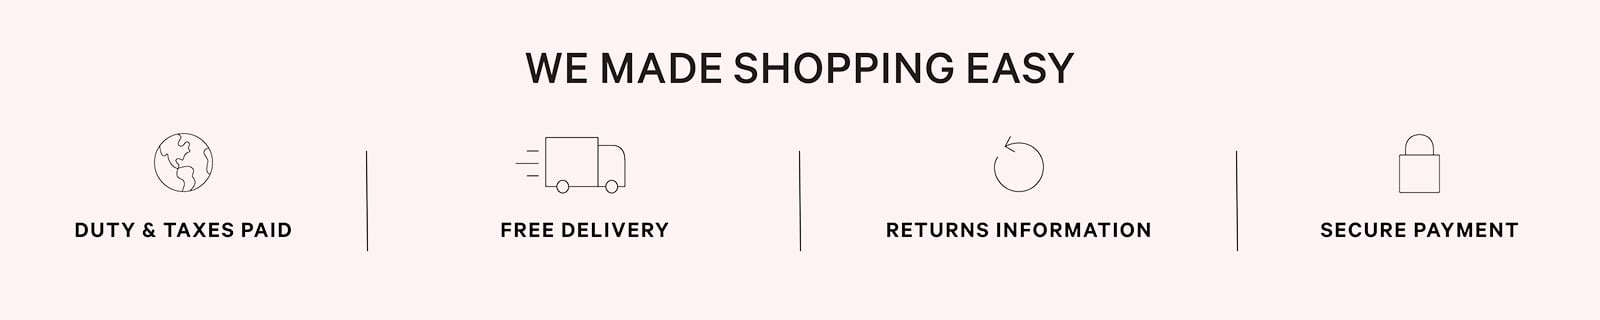 We made shopping Easy